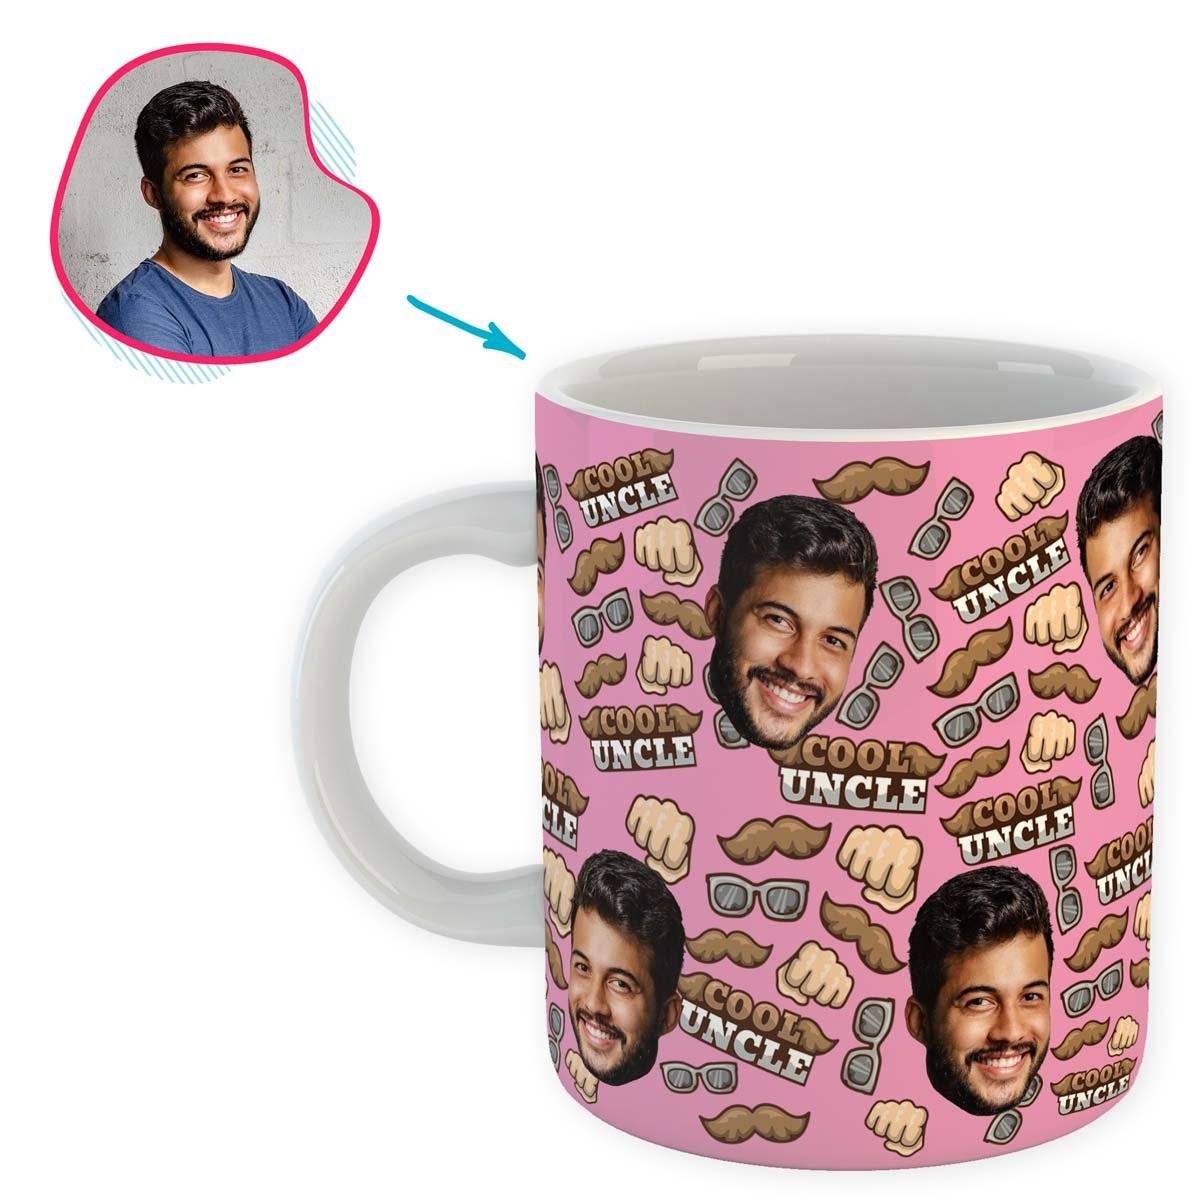 Pink Uncle personalized mug with photo of face printed on it